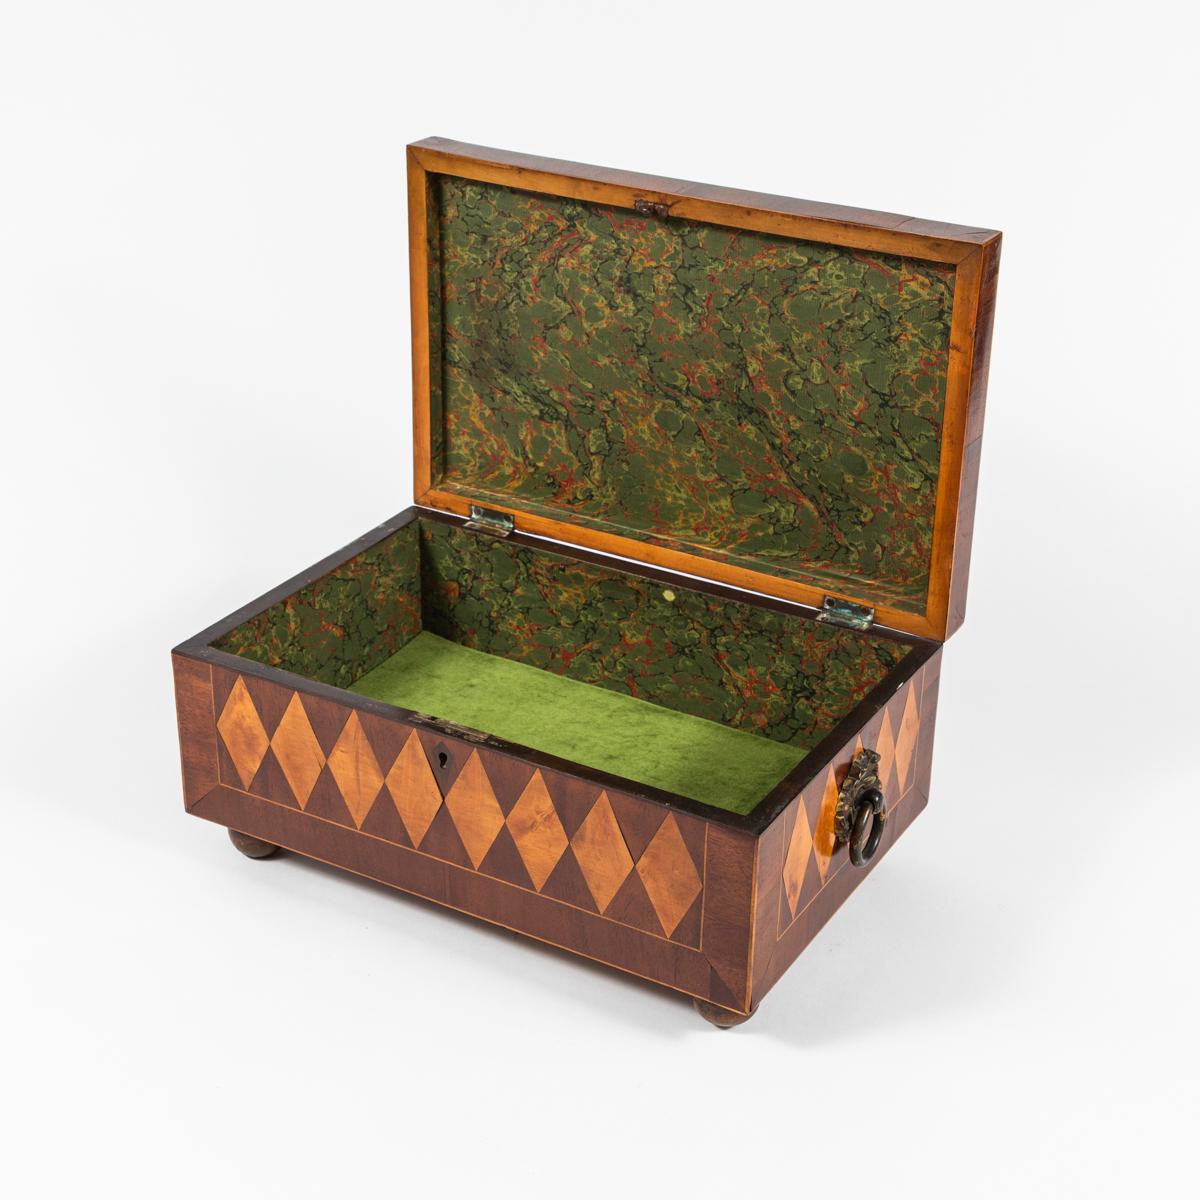 This is a beautifully crafted parquetry box dates back from the regency period in England. The expert craftsmanship is clearly on display in this piece. The exterior of the box is adorned with a parquetry pattern of rows of diamonds, while the